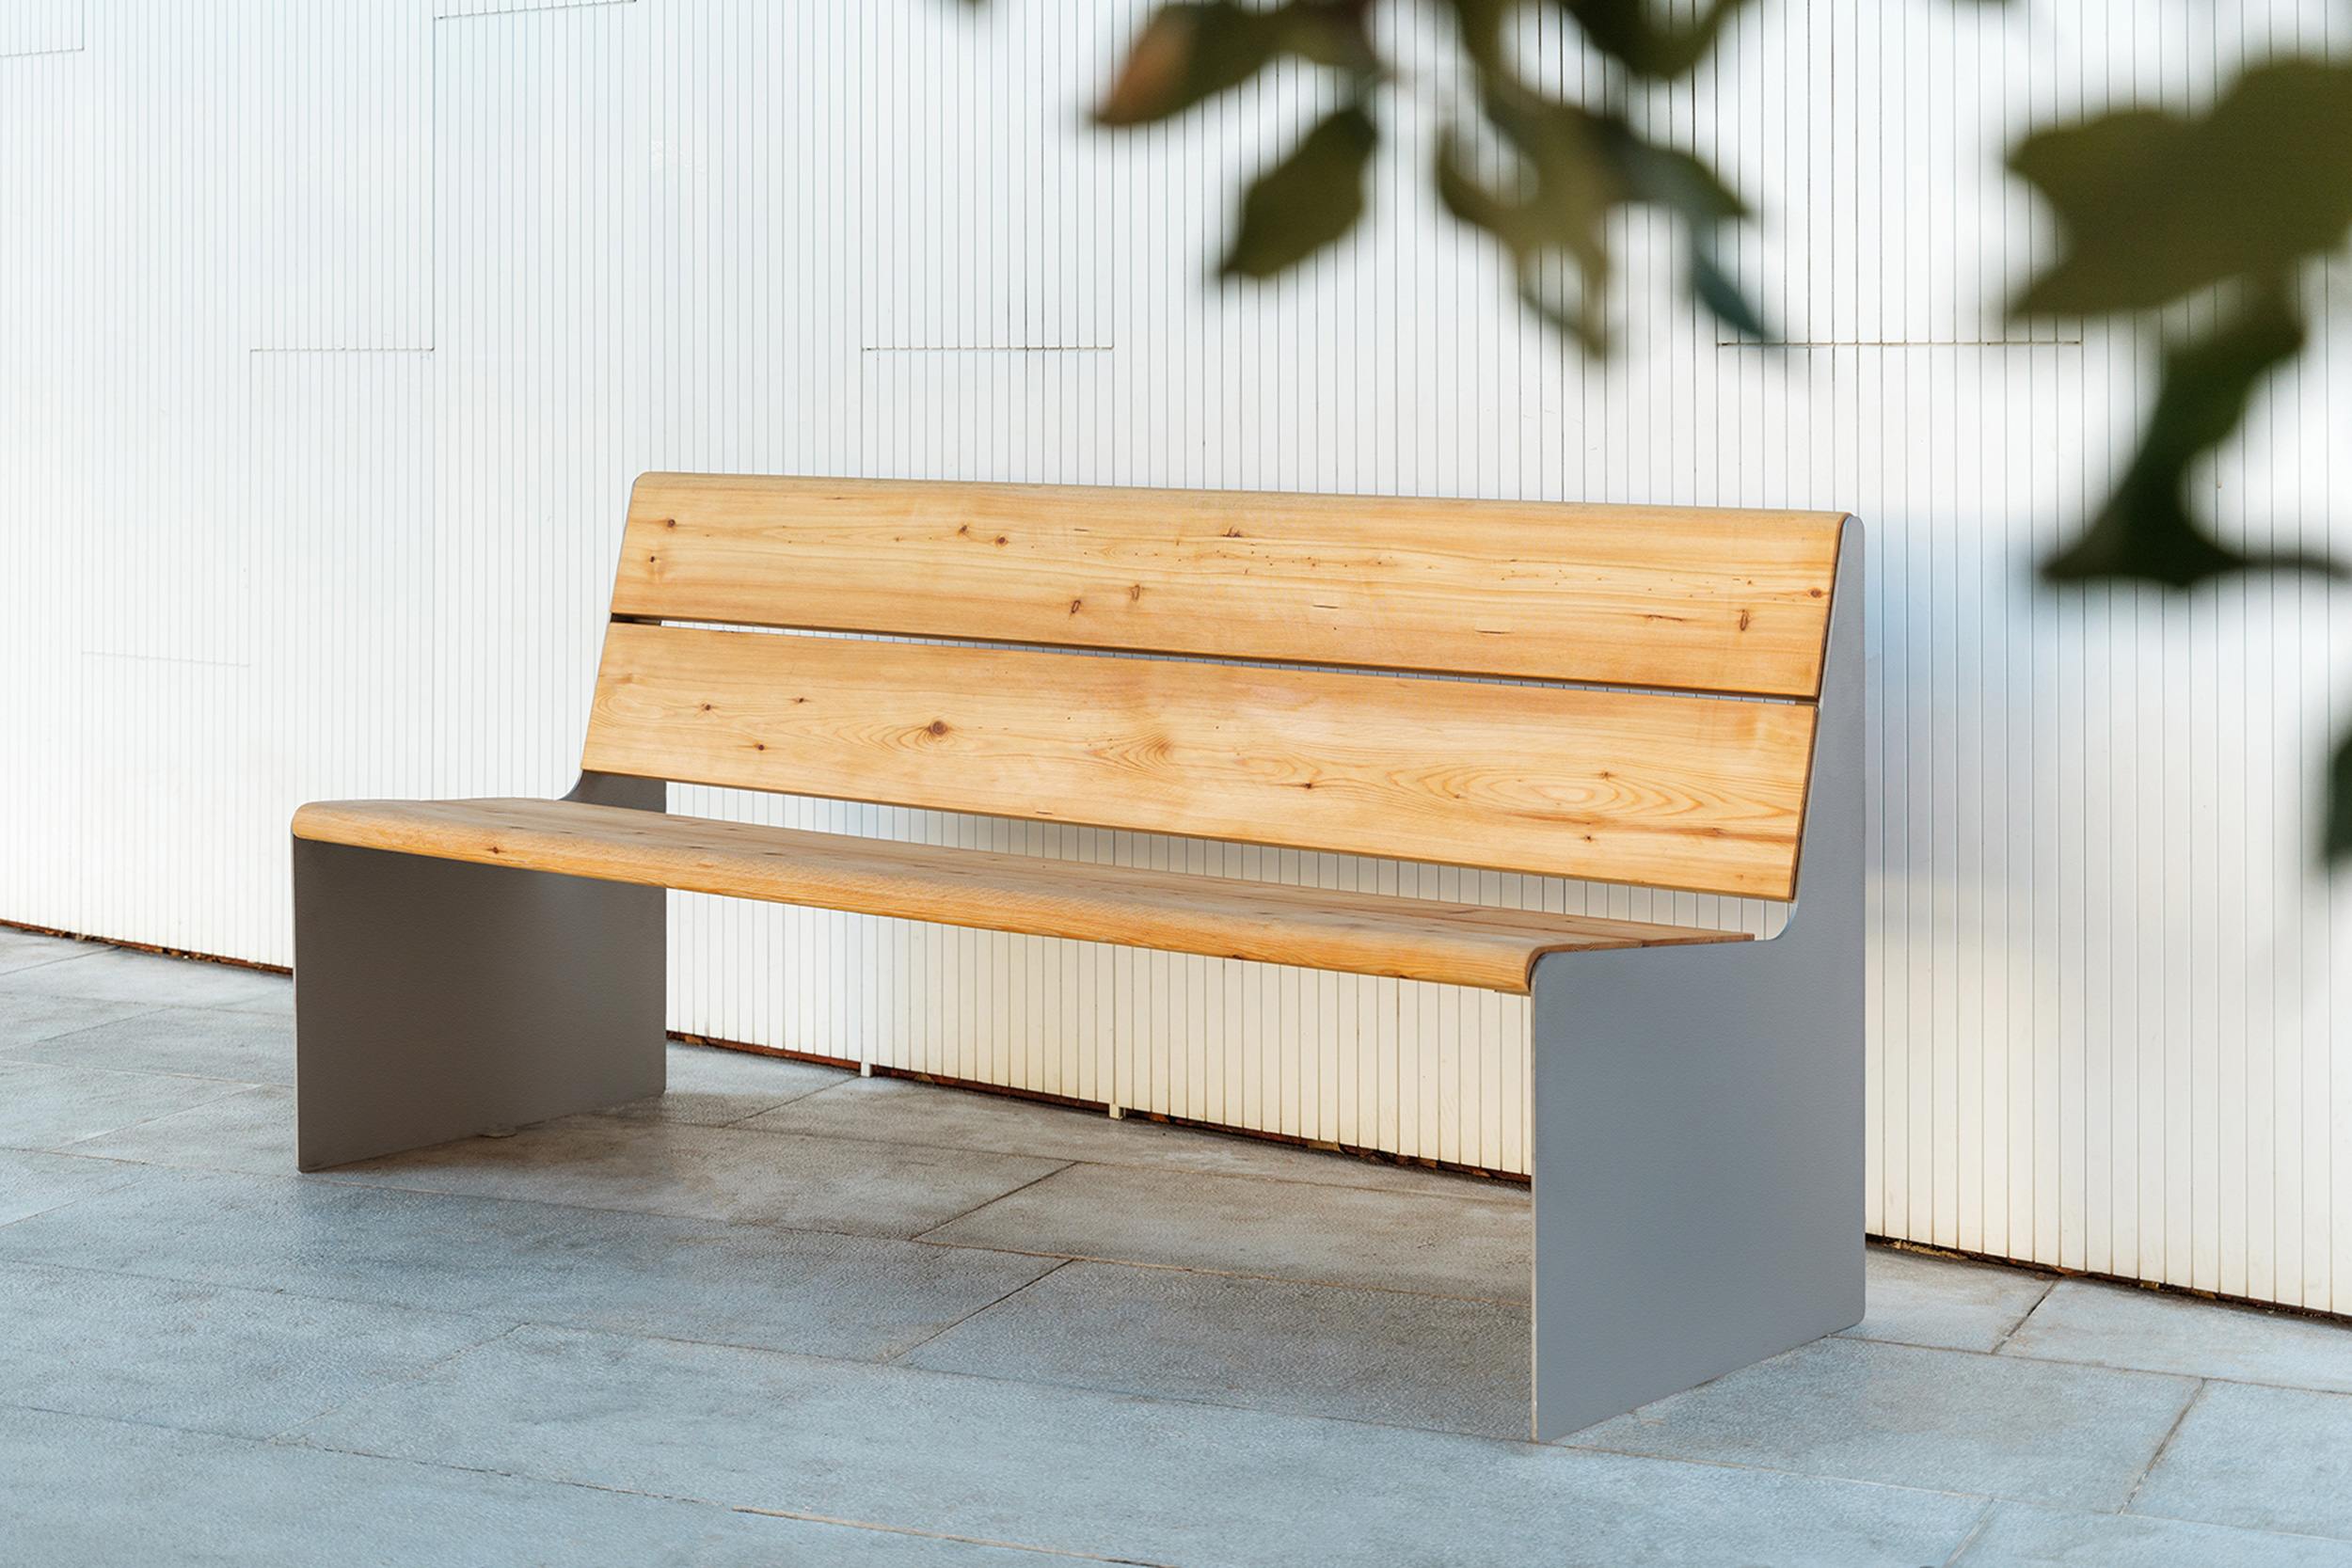 A street bench, specially designed to prioritize comfort and aesthetics in public spaces